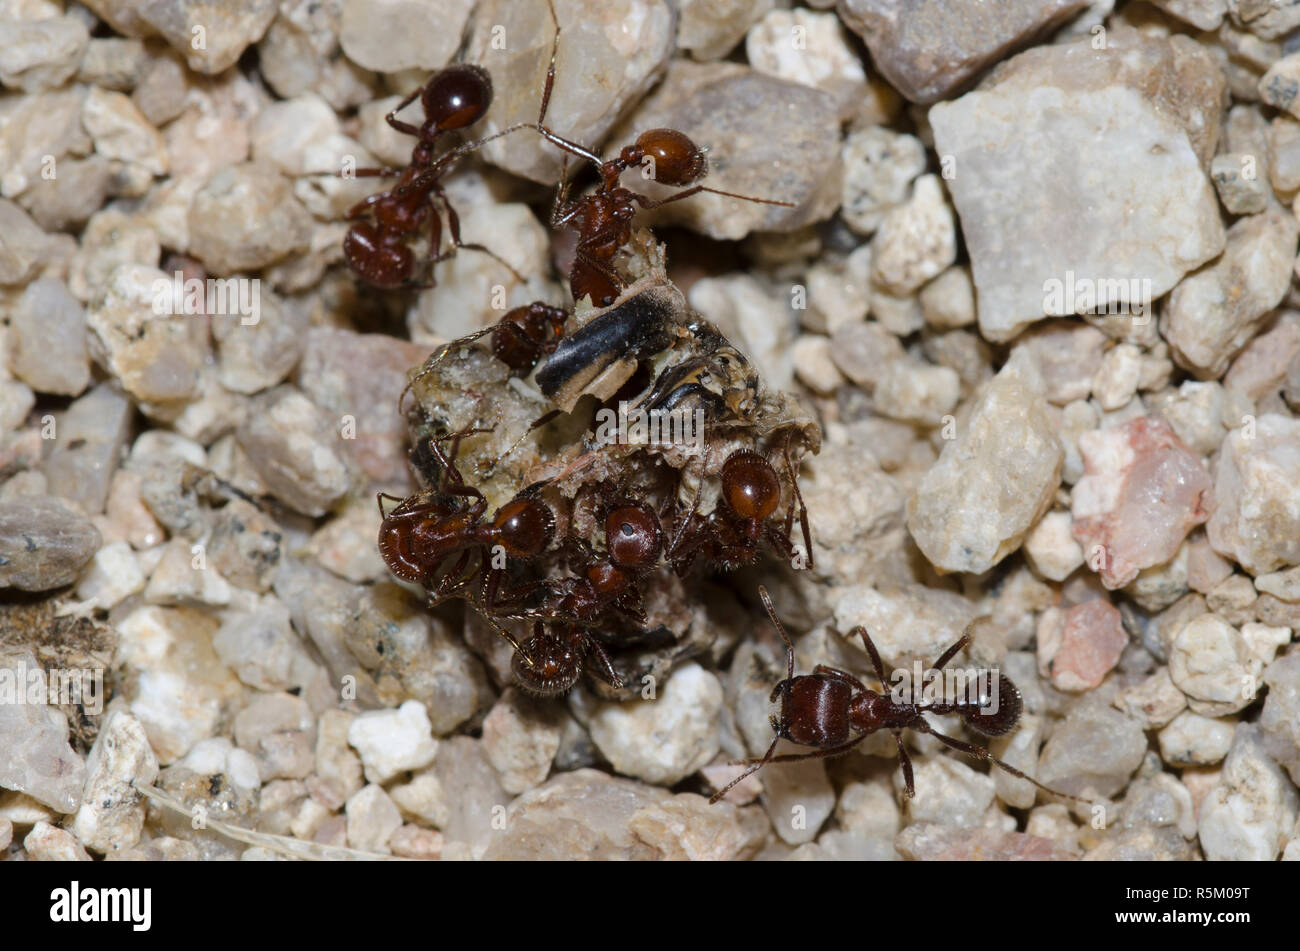 Harvester Ants, Pogonomyrmex sp., scavenging dead insect Stock Photo